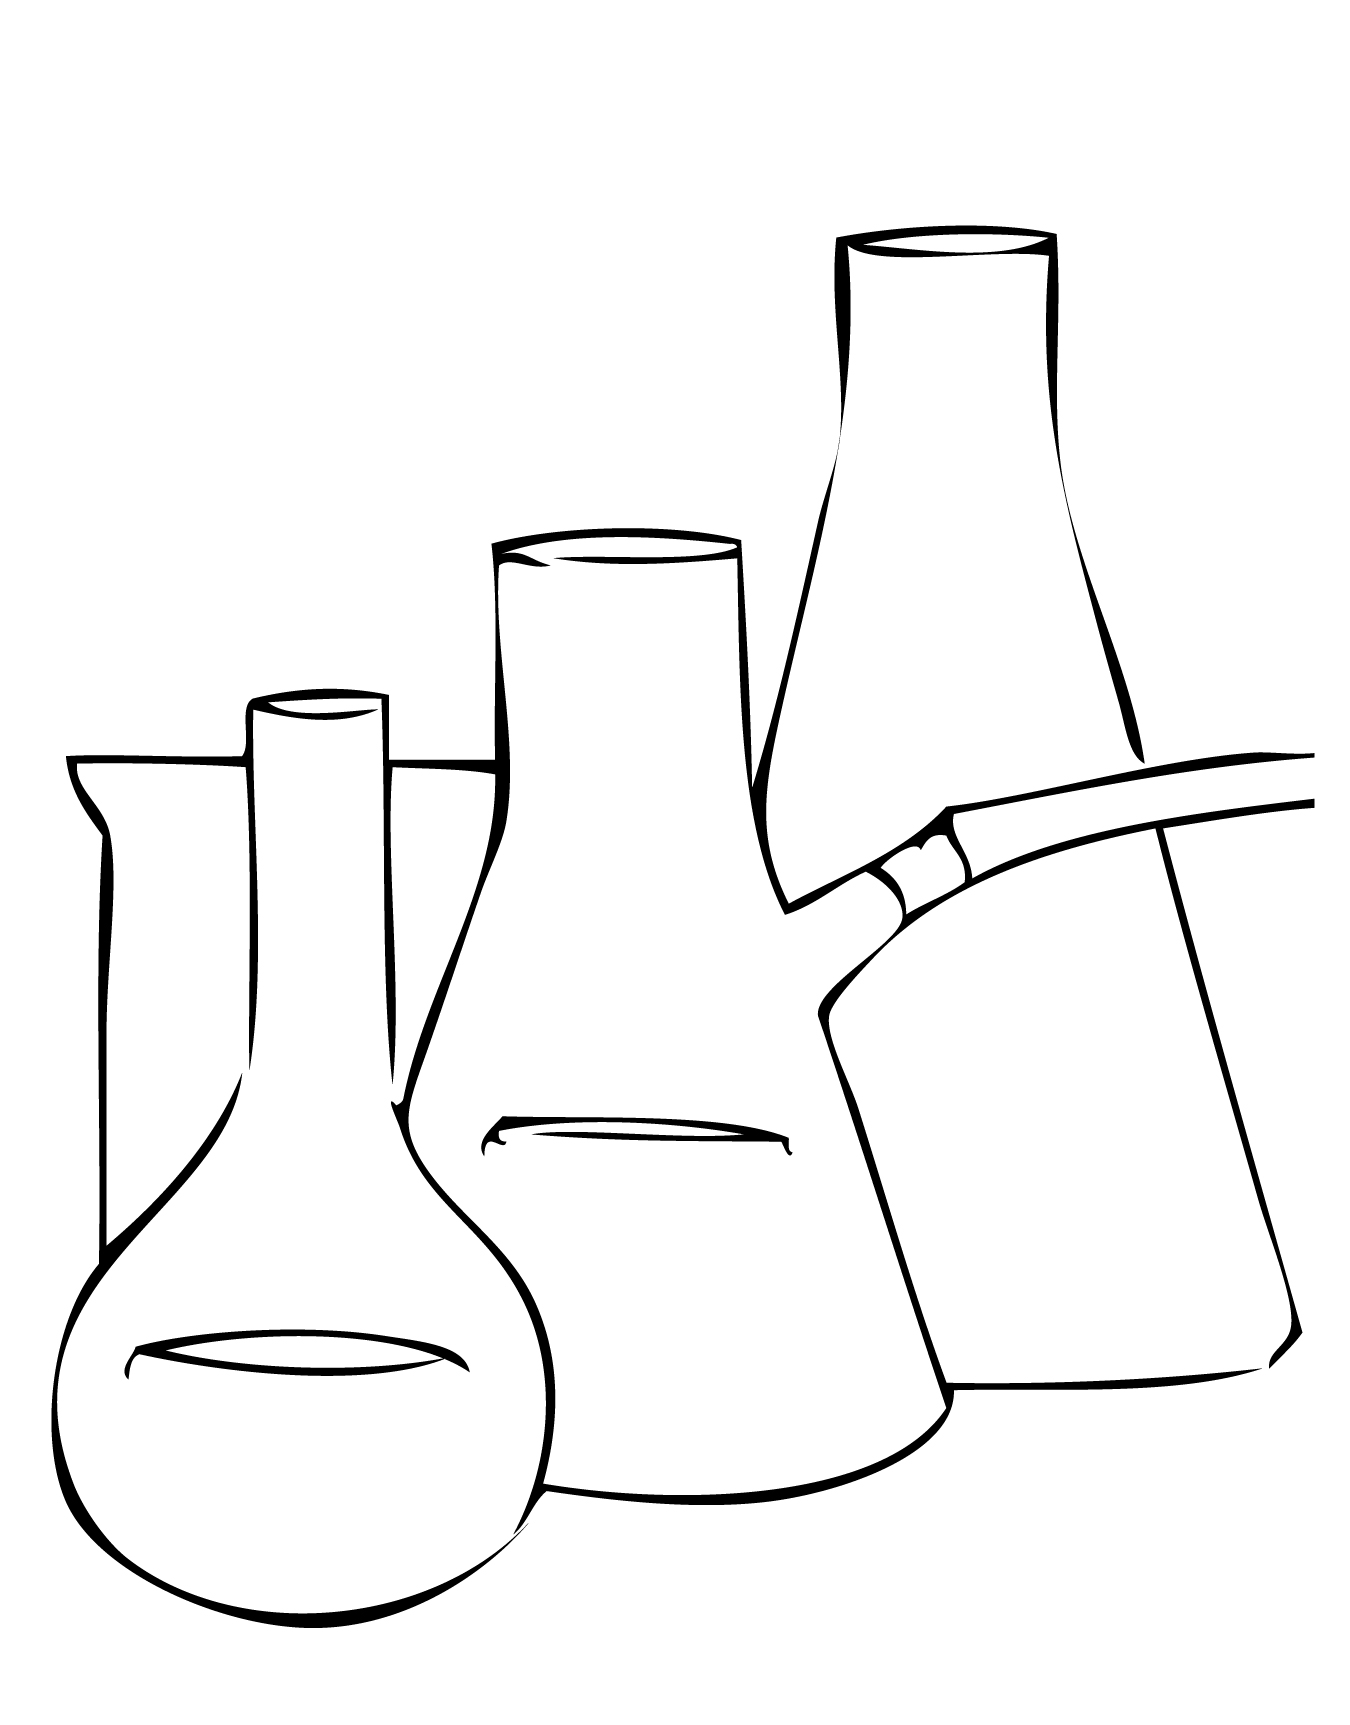 Science Equipment Coloring Pages at GetColorings.com ...